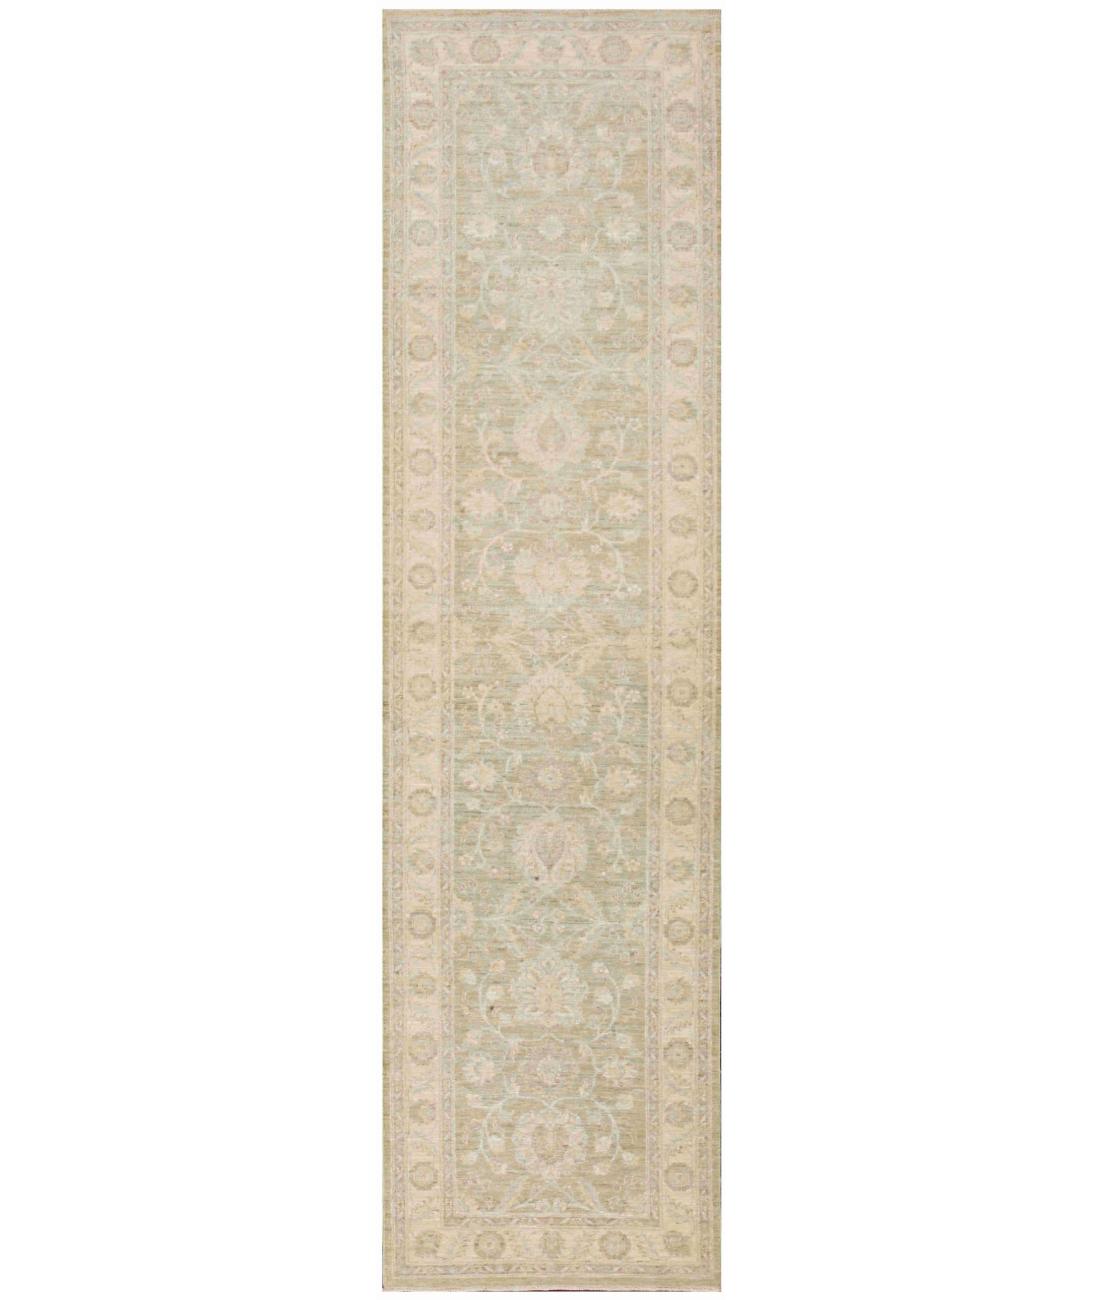 Hand Knotted Serenity Wool Rug - 2'7'' x 9'11'' 2' 7" X 9' 11" ( 79 X 302 ) / Grey / Ivory